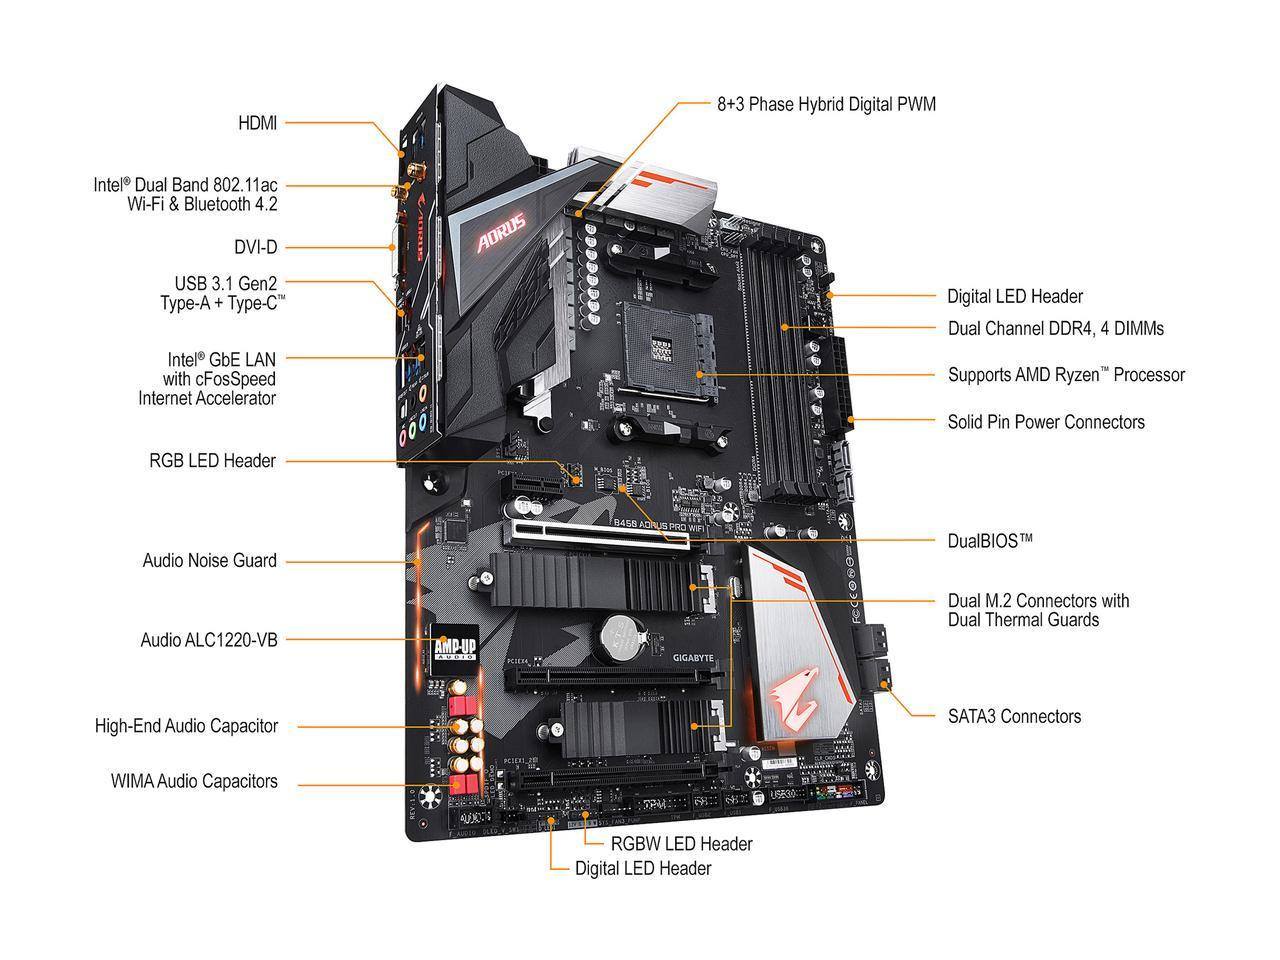 Alternatives to this motherboard? - CPUs, Motherboards, and Memory